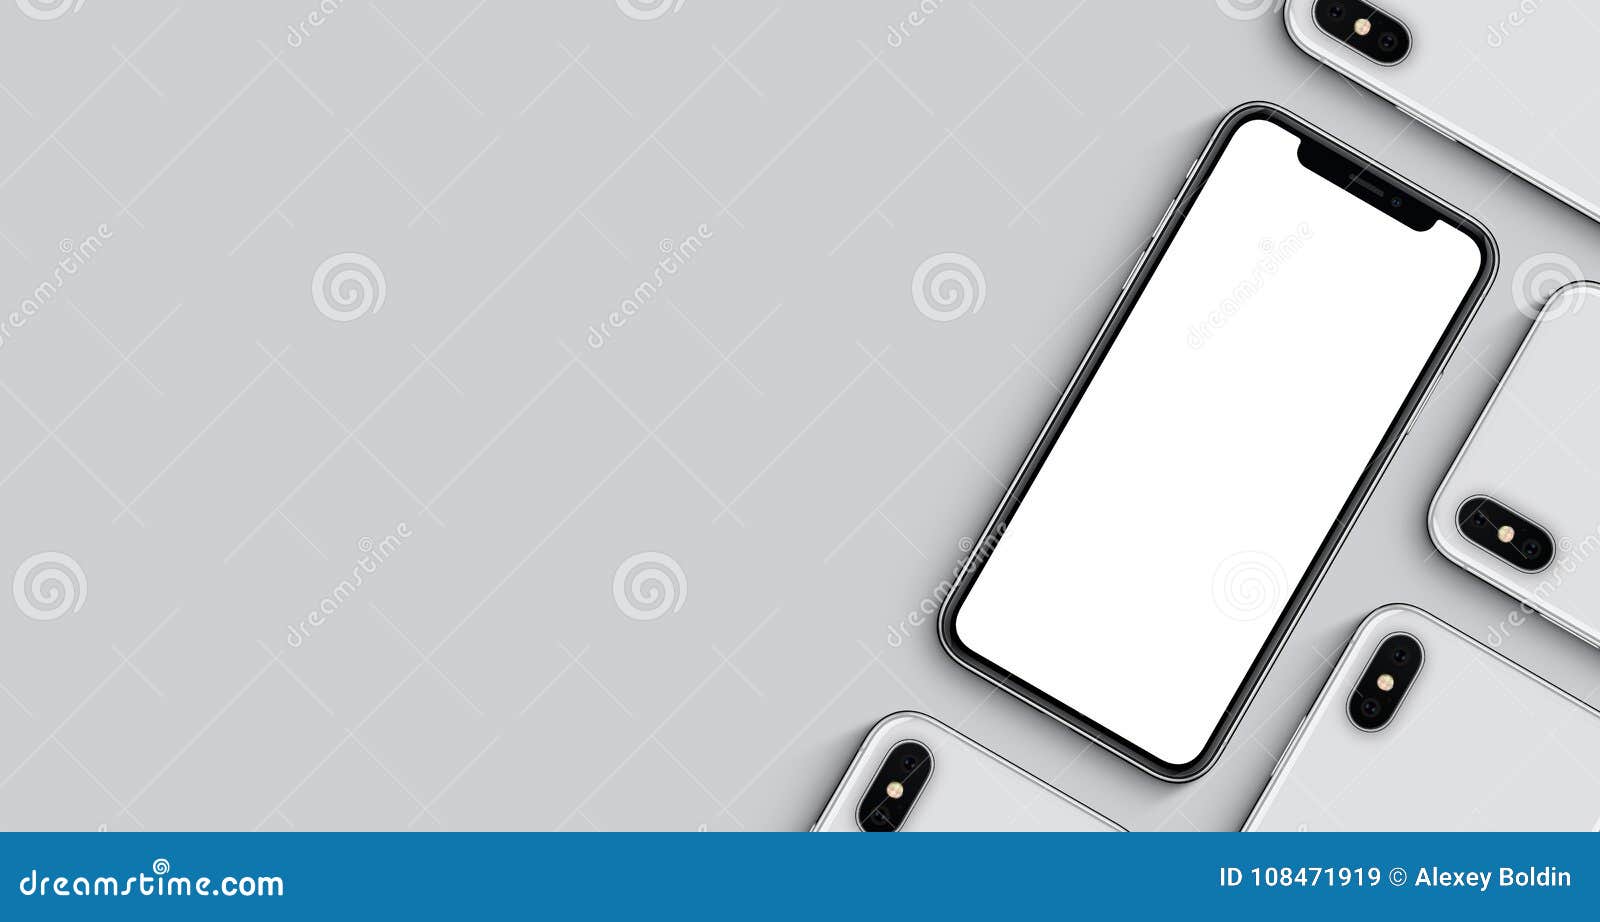 smartphones like iphone x mockup banner with copy space on gray background